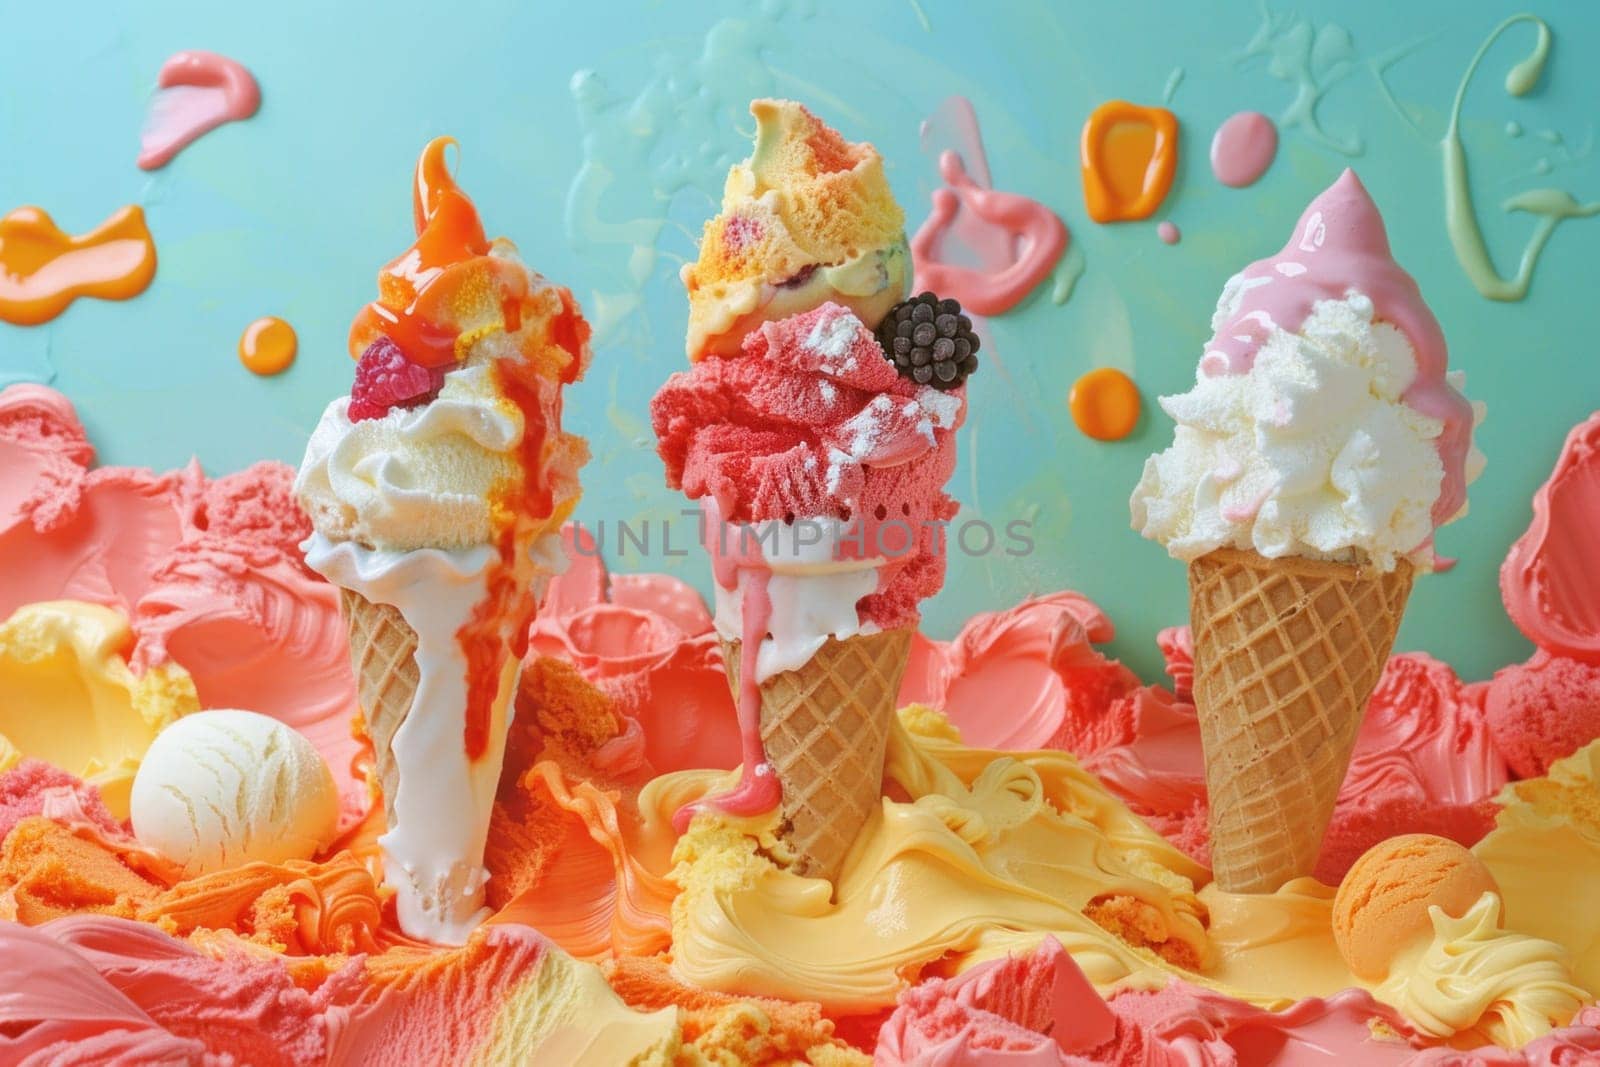 Colorful ice cream cones sitting on top of a vibrant pile of pink and orange ice cream, tempting treat for a summer trip